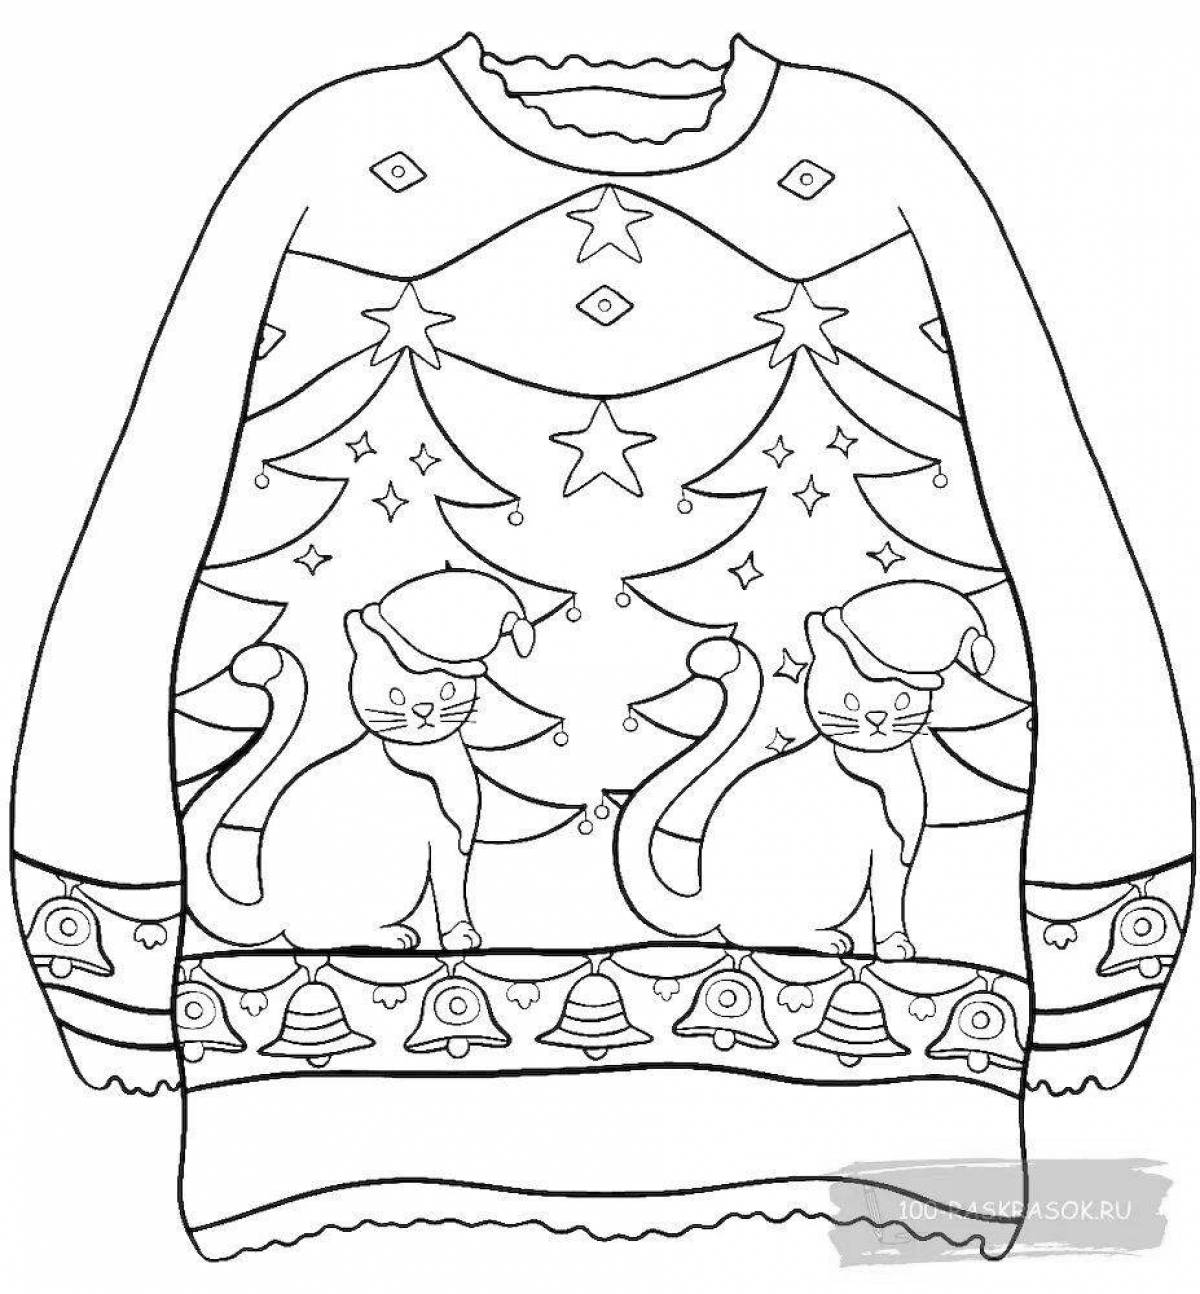 Colourful coloring sweater for 4-5 year olds